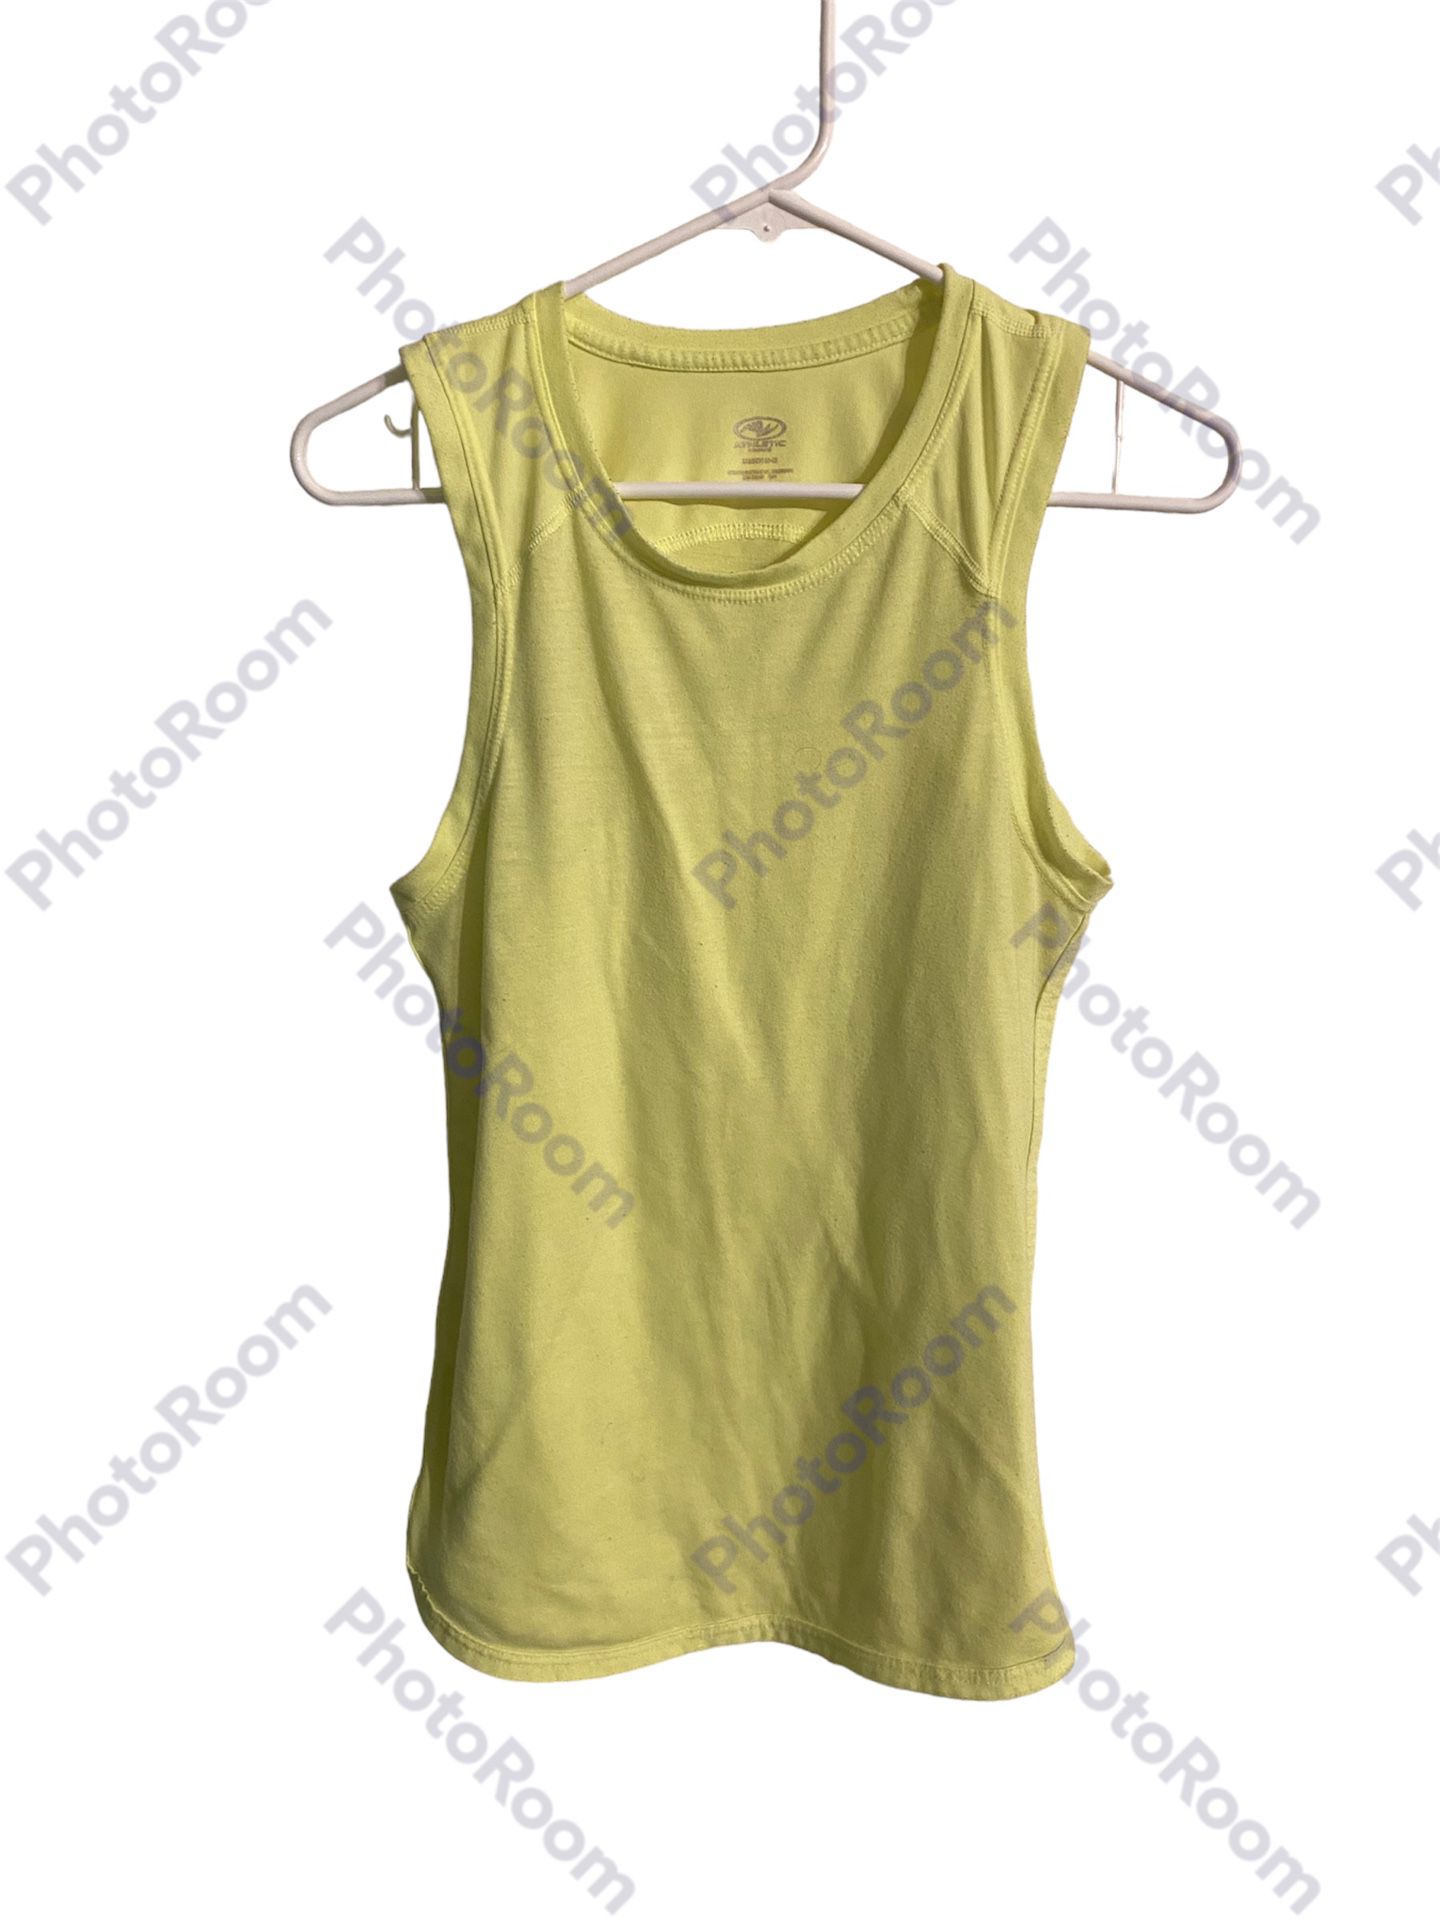 Athletic Works Women’s Fluorescent Yellow Tank Top, Size Xs